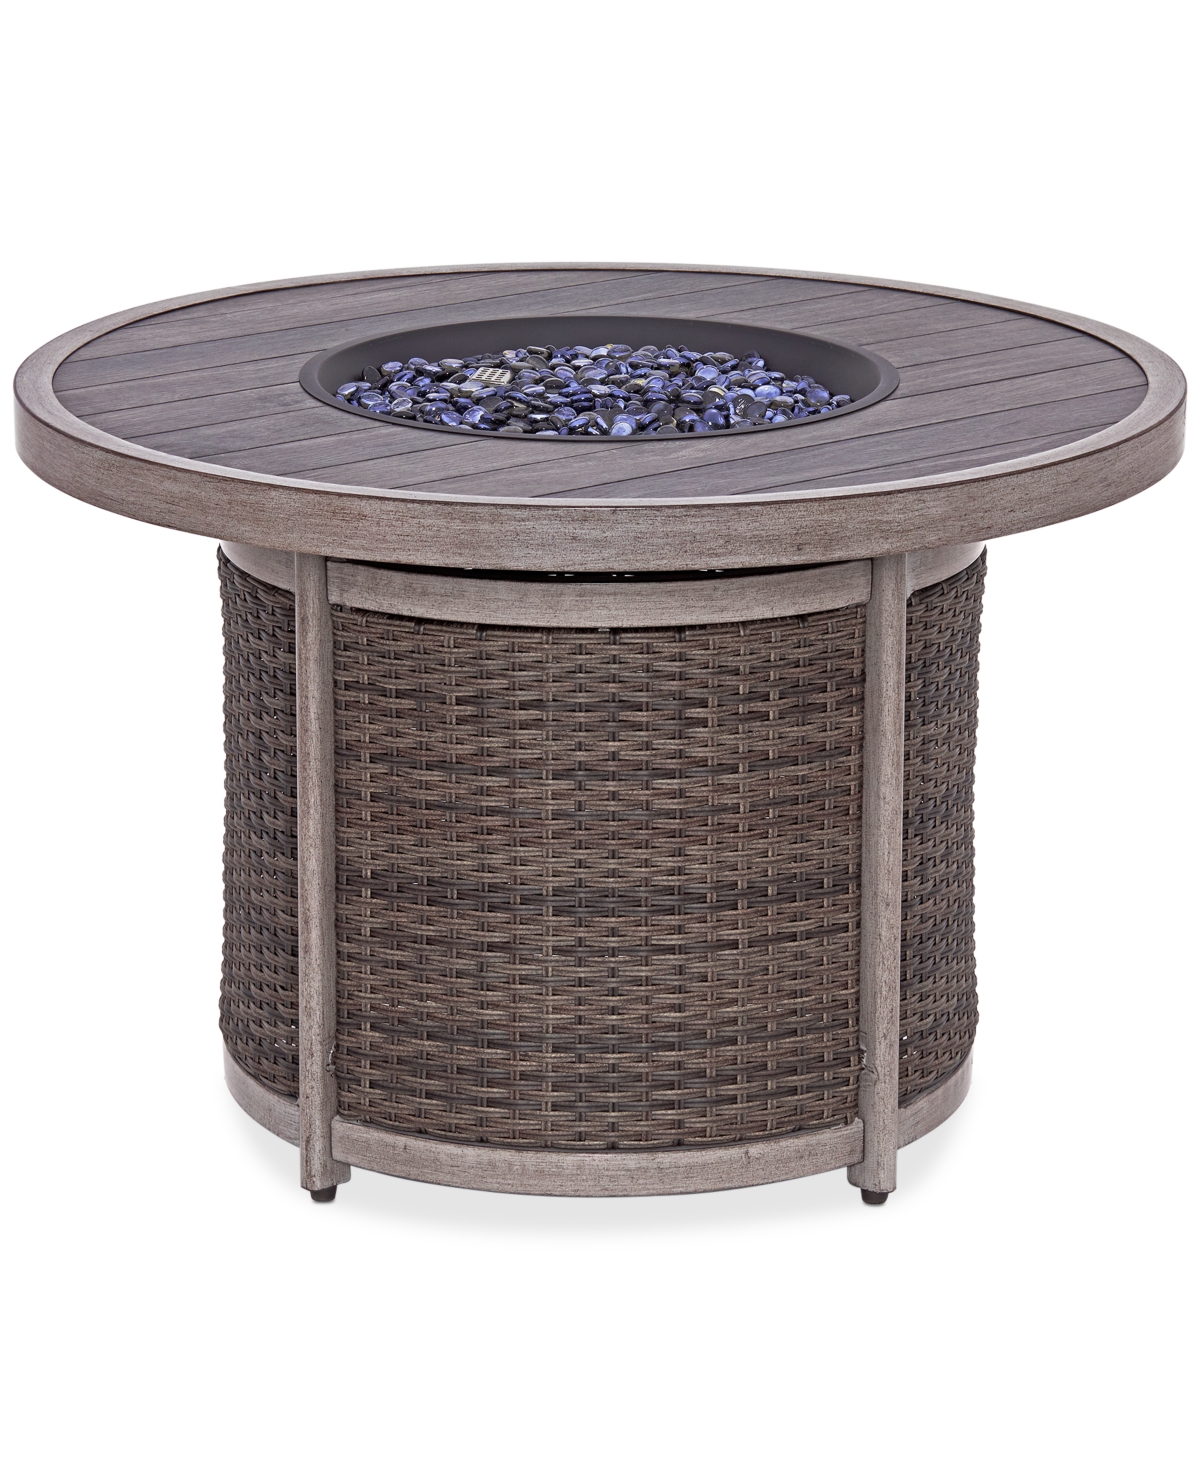 Charleston Outdoor Round Fire Pit, Created for Macys